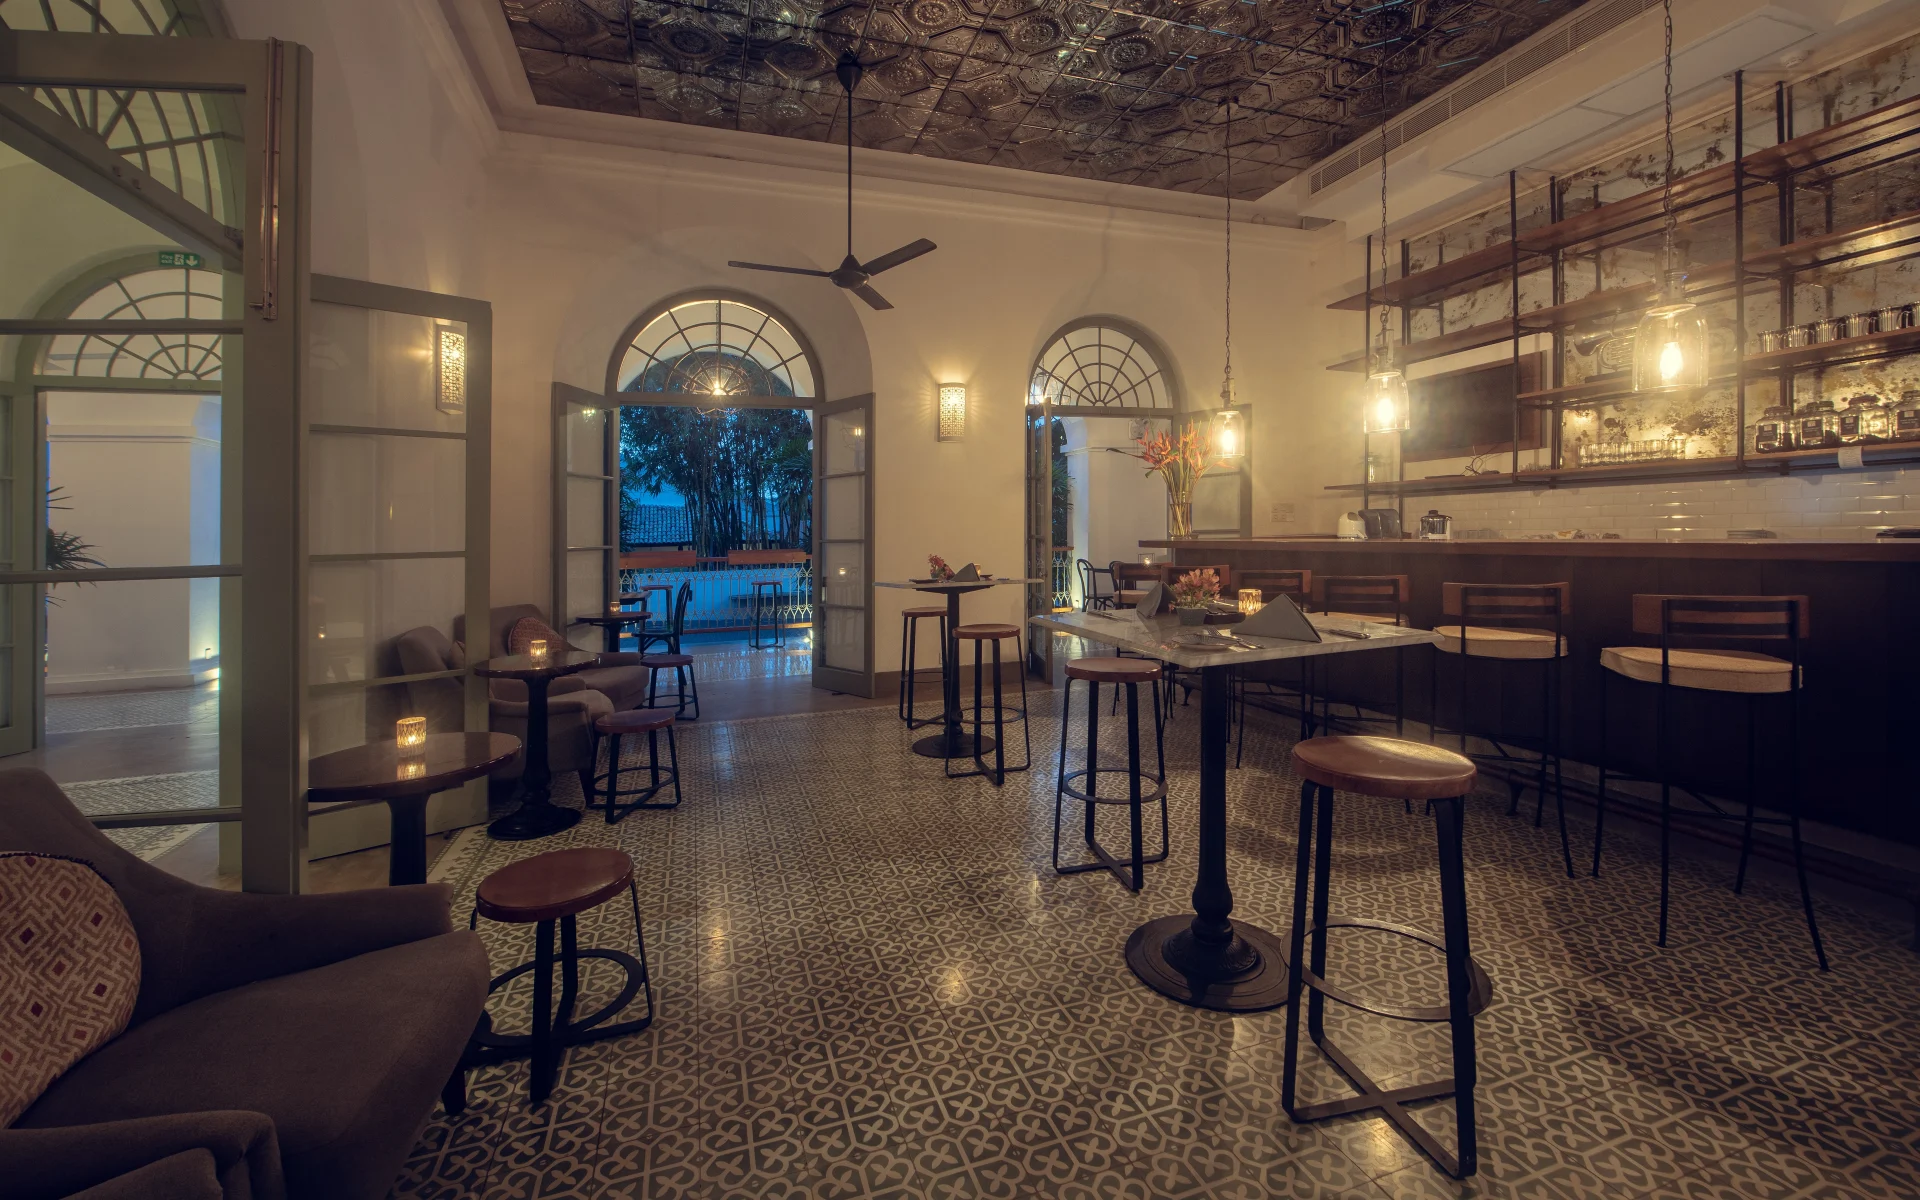 The bar at Fort Bazaar is dimly lit during an evening and its floor is tiled in a mosaic style.